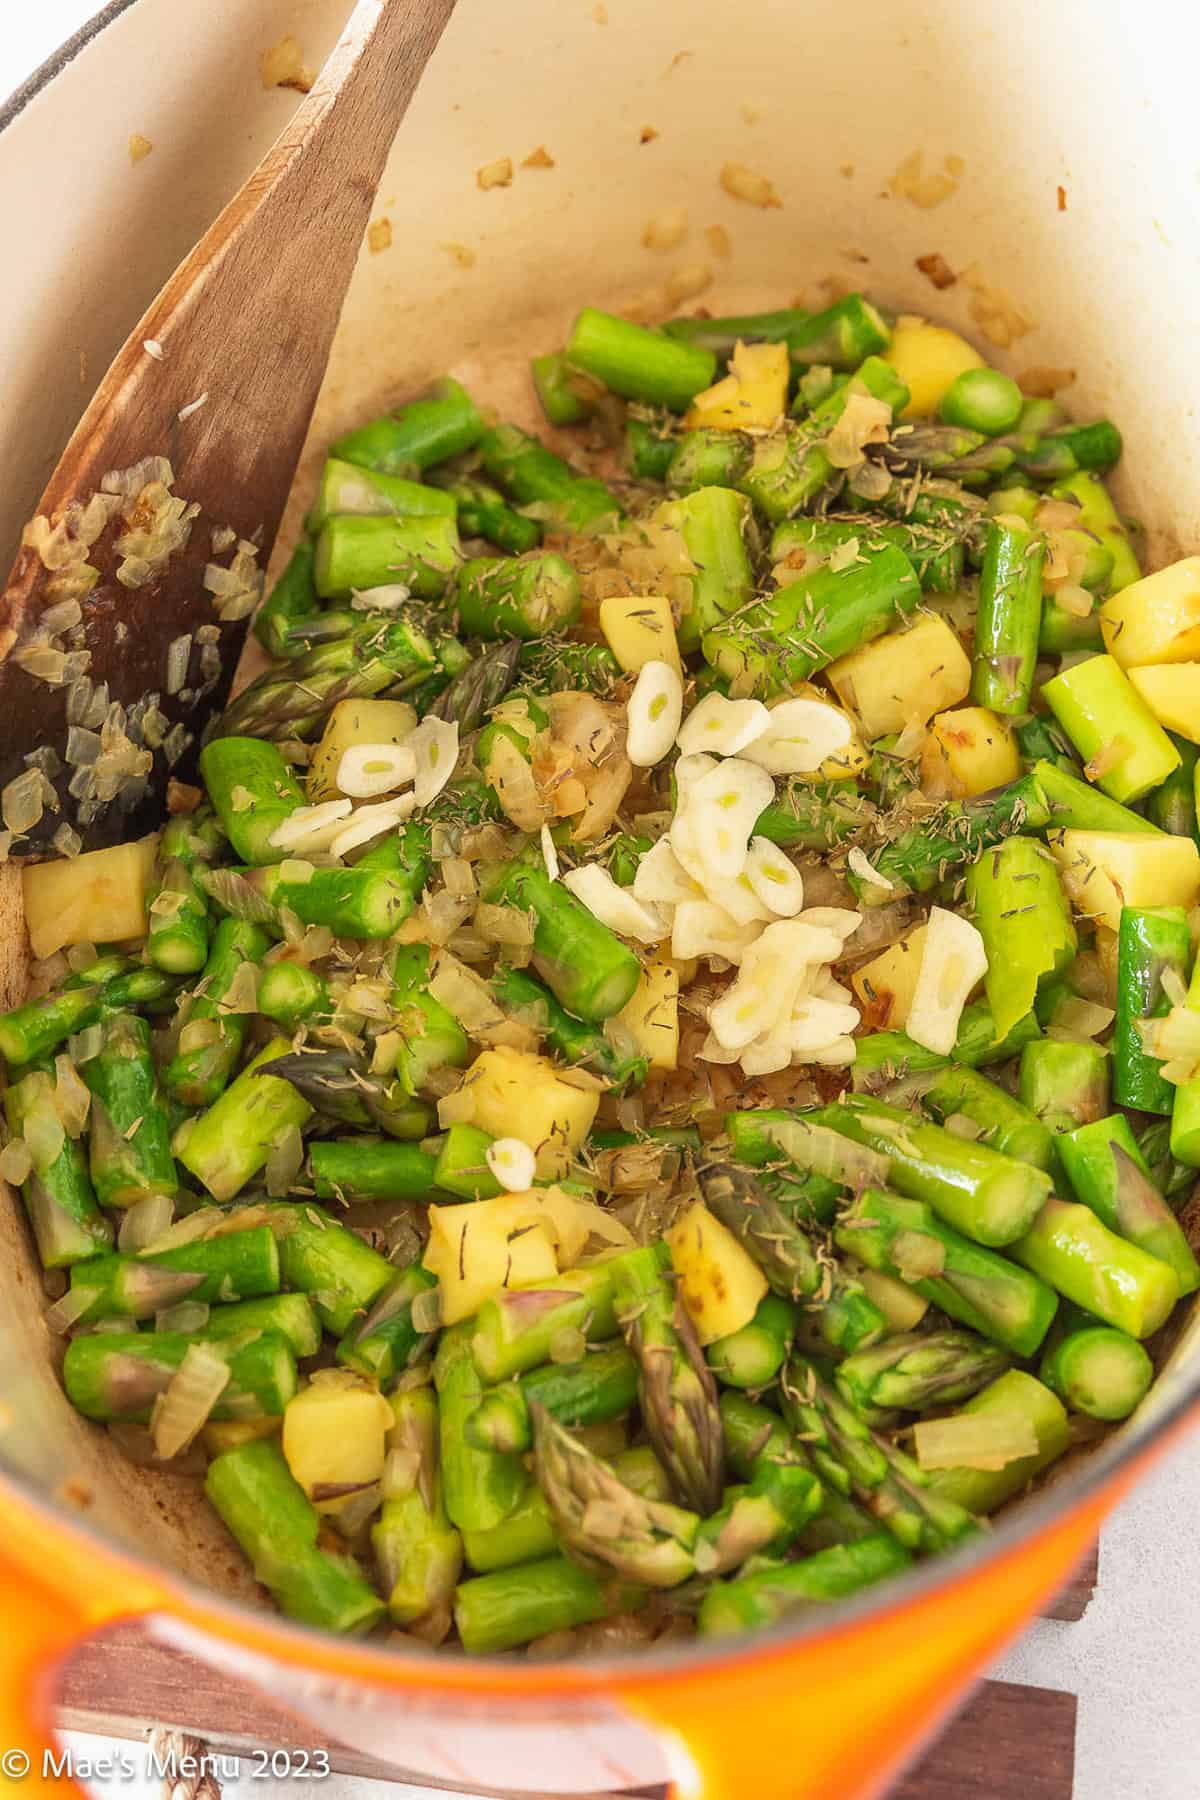 Sauteing the asparagus and potatoes in the pot with the garlic and other seasonings.